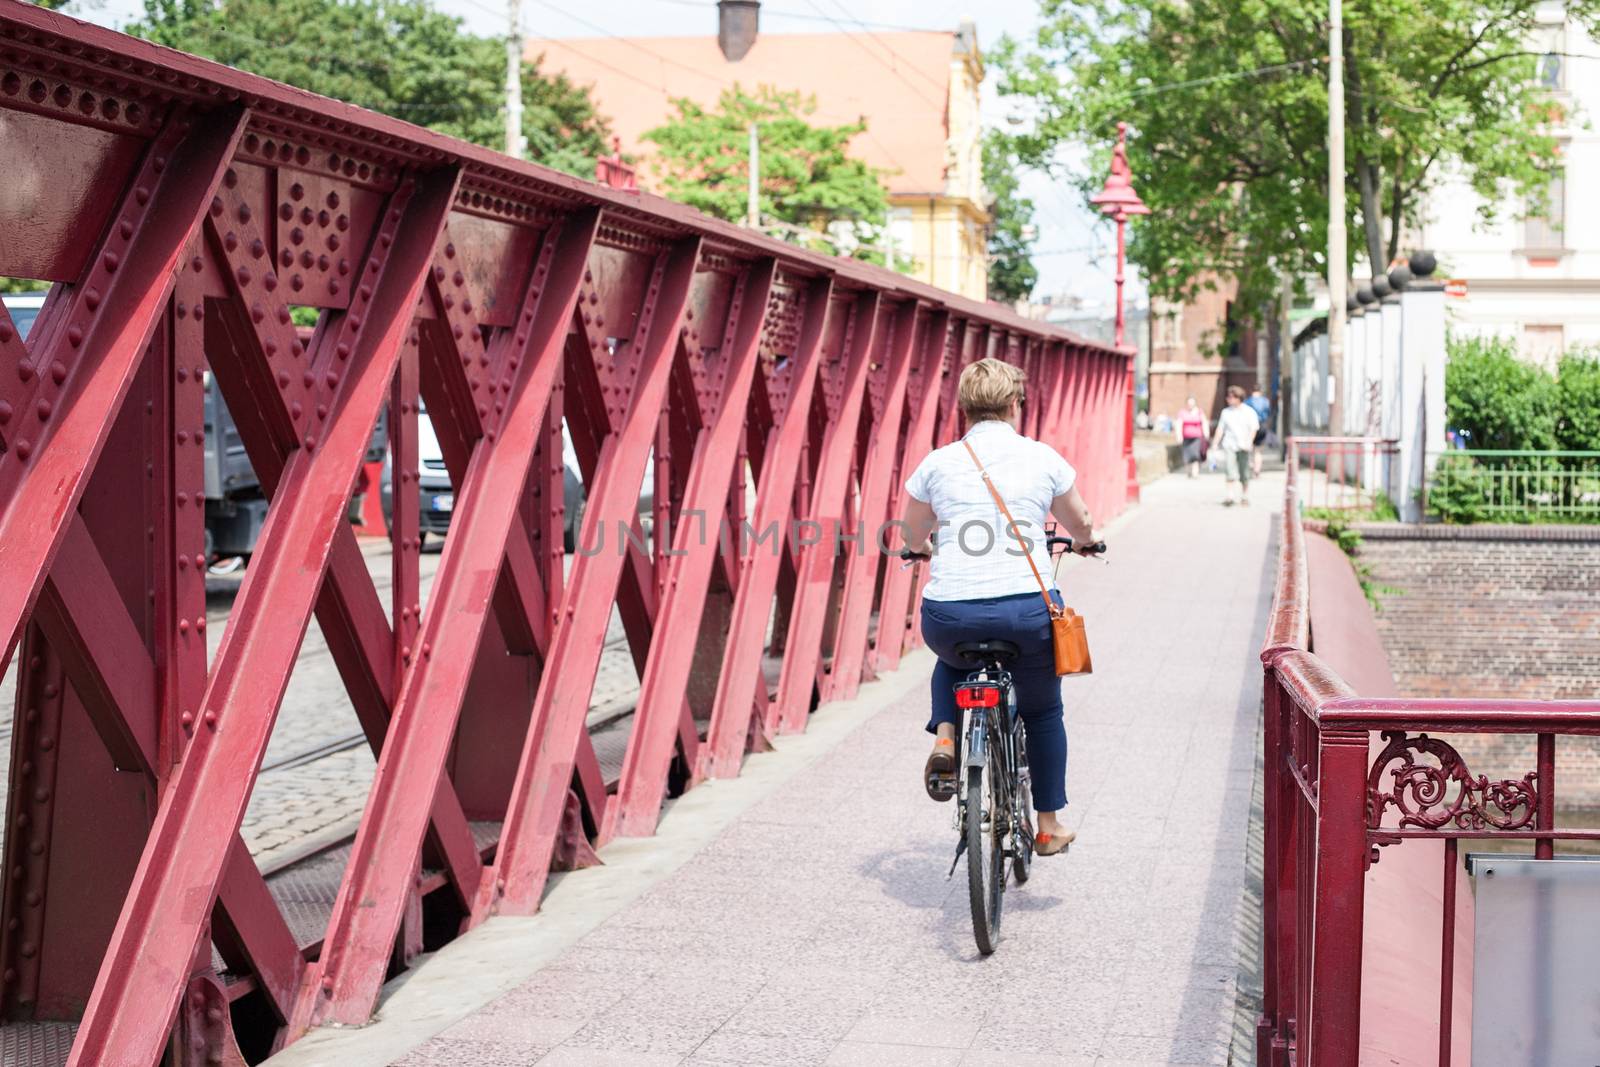 A woman crossing an old iron red bridge on a bicycle